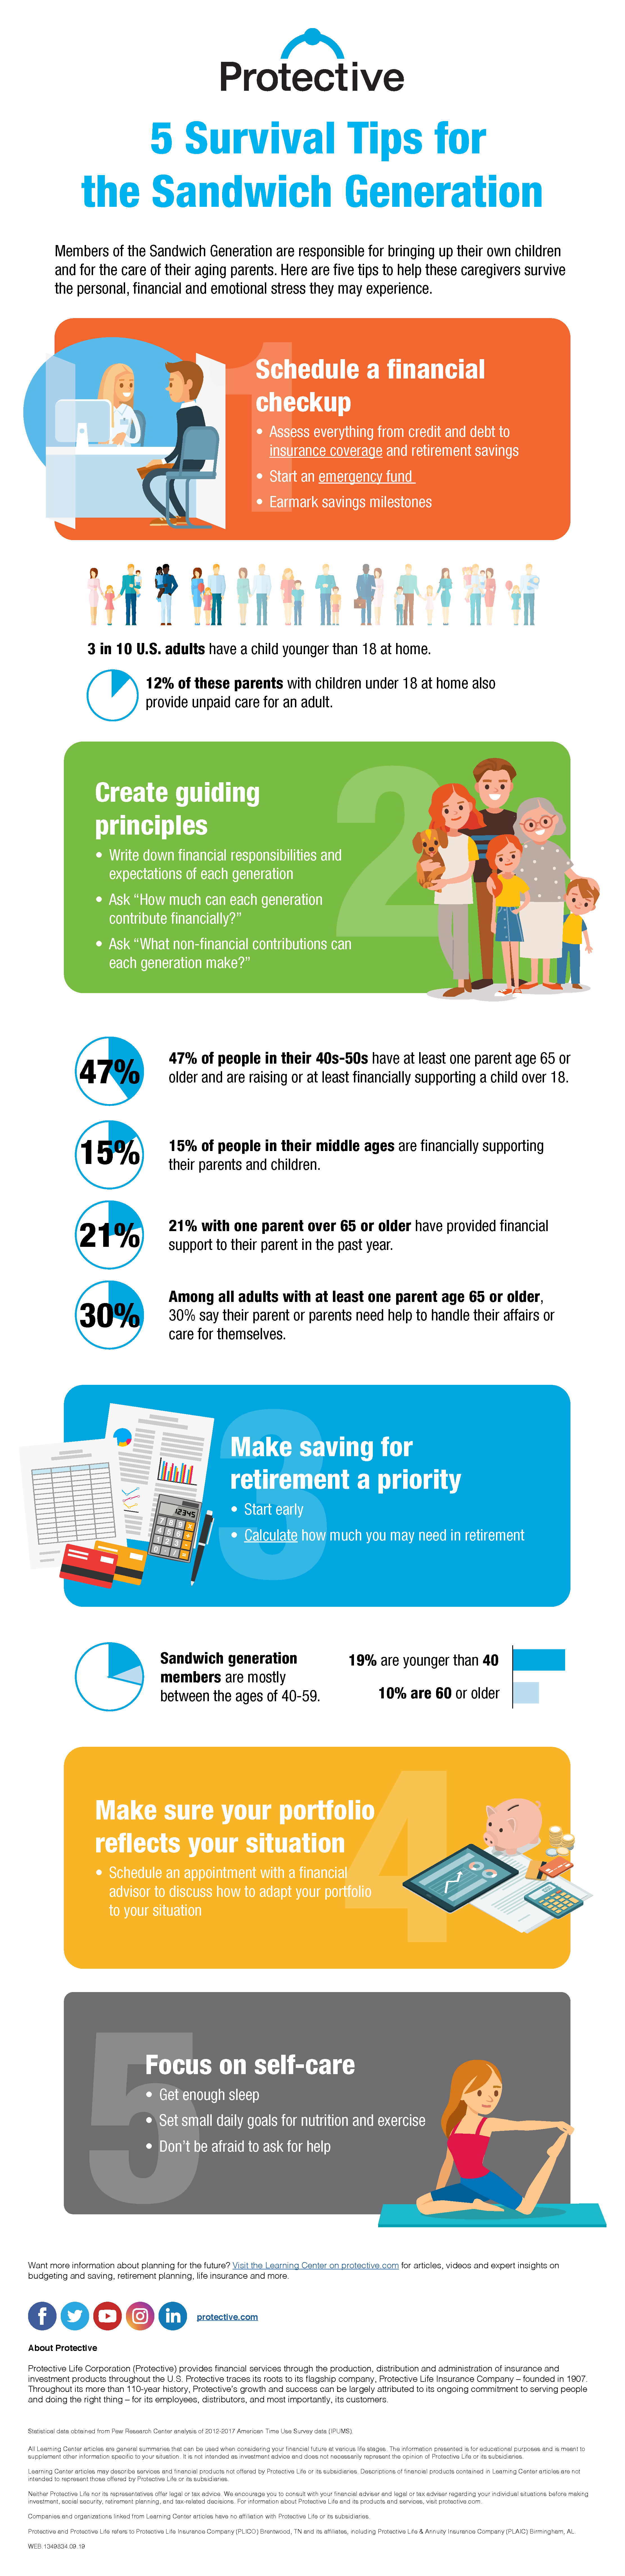 Tips for sandwich generation infographic